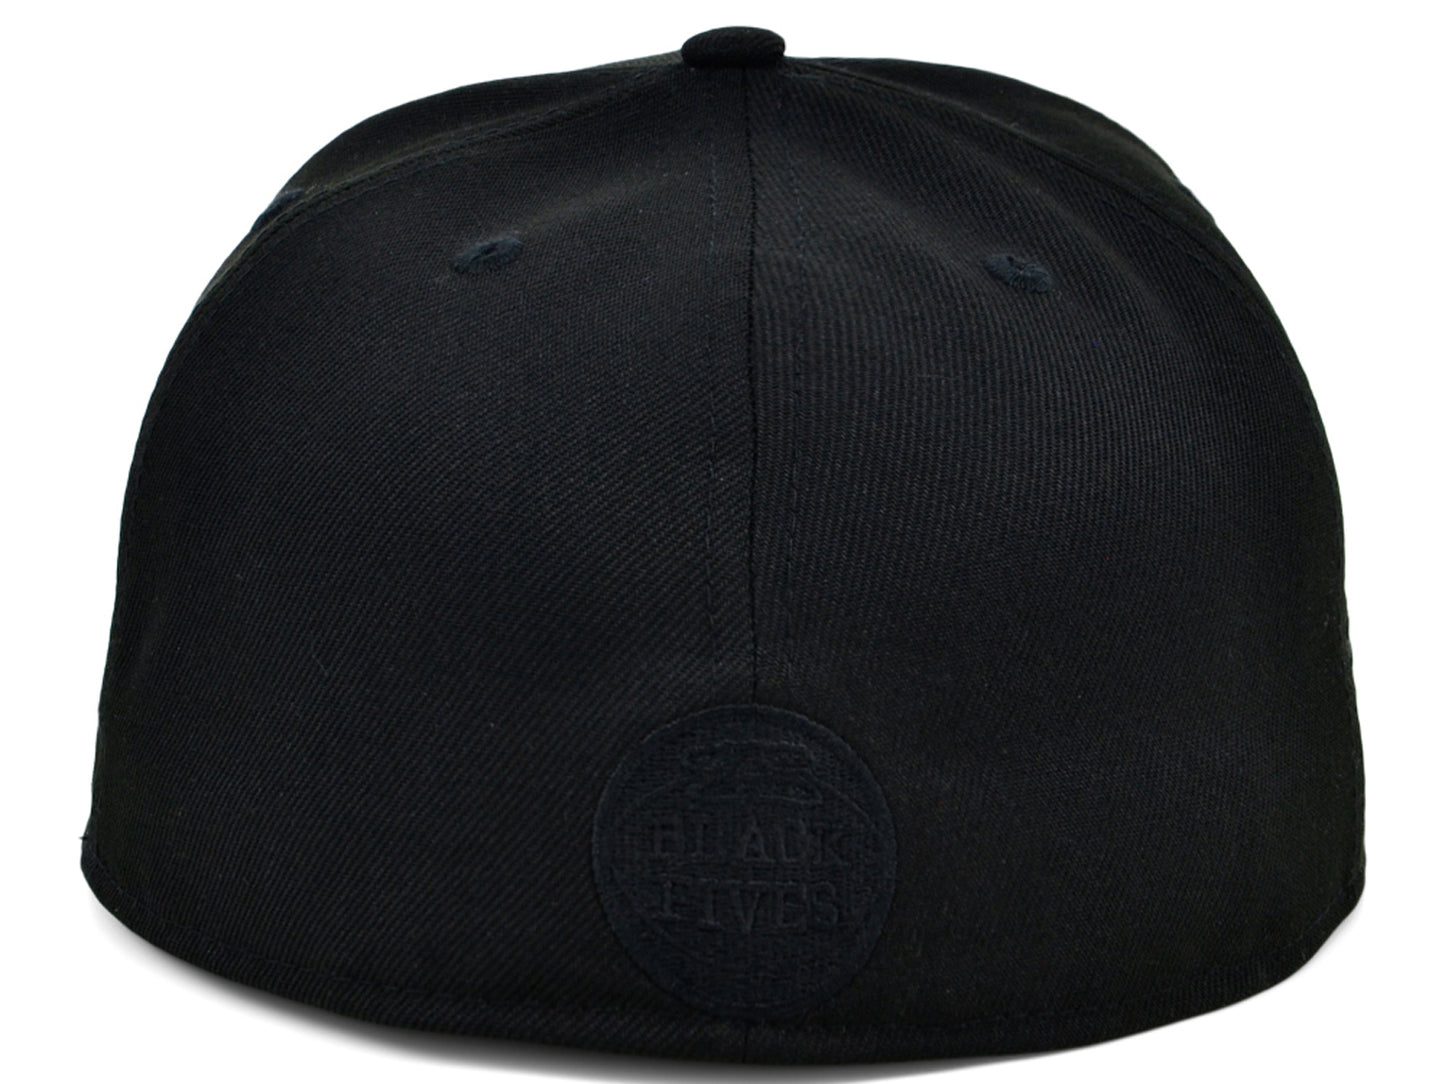 Black 5ives All-Black Tonal Fitted Cap